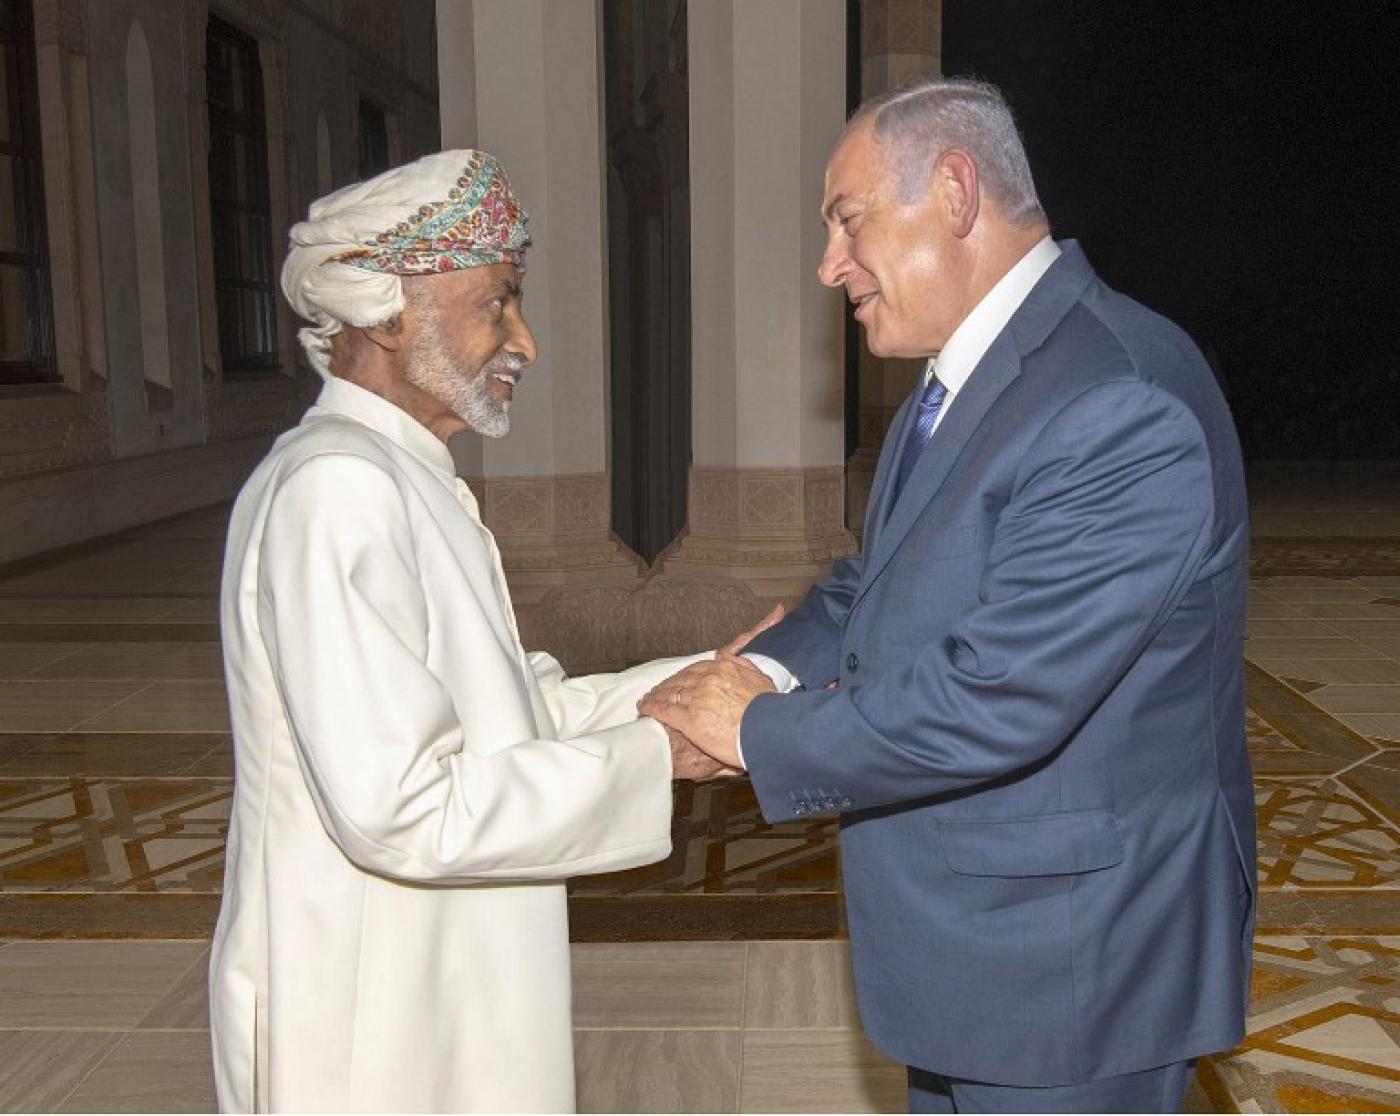 A handout picture released by the Omani Royal Palace shows Oman's Sultan Qaboos, left, with Israeli Prime Minister Benjamin Netanyahu in Muscat on 26 October (AFP)